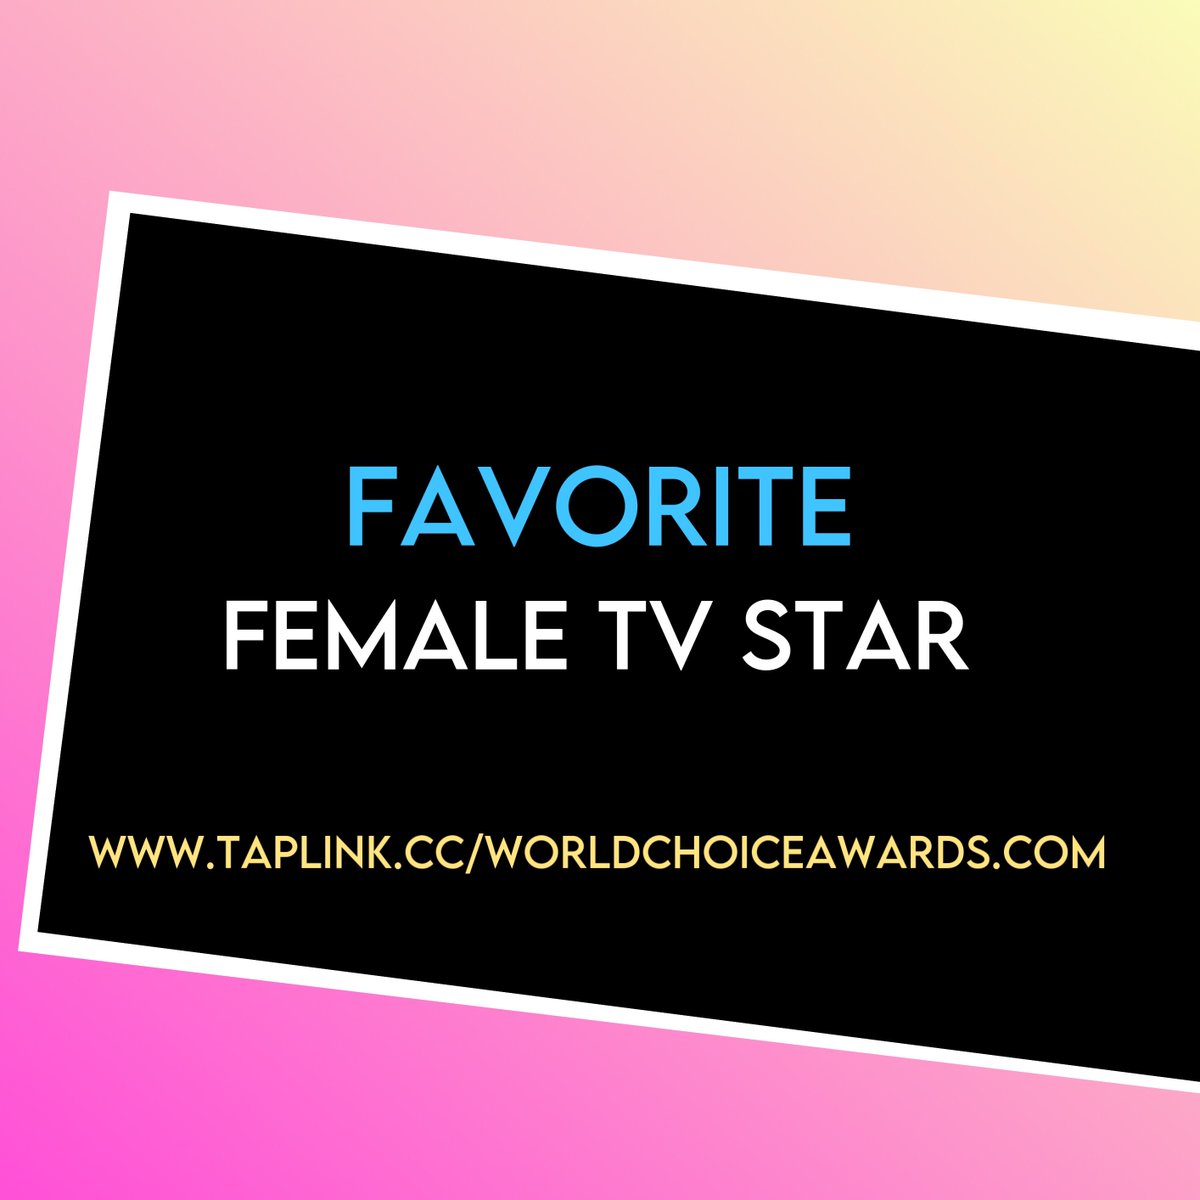 Nominees Category #19 - FAVORITE FEMALE TV STAR

Comment below or visit: taplink.cc/worldchoiceawa…

#WorldChoiceAwards #wca #nominate #favorite #entertainment #female #tvstar #tv #tvshow #tvshows #series #seriesnetflix #movies #movie